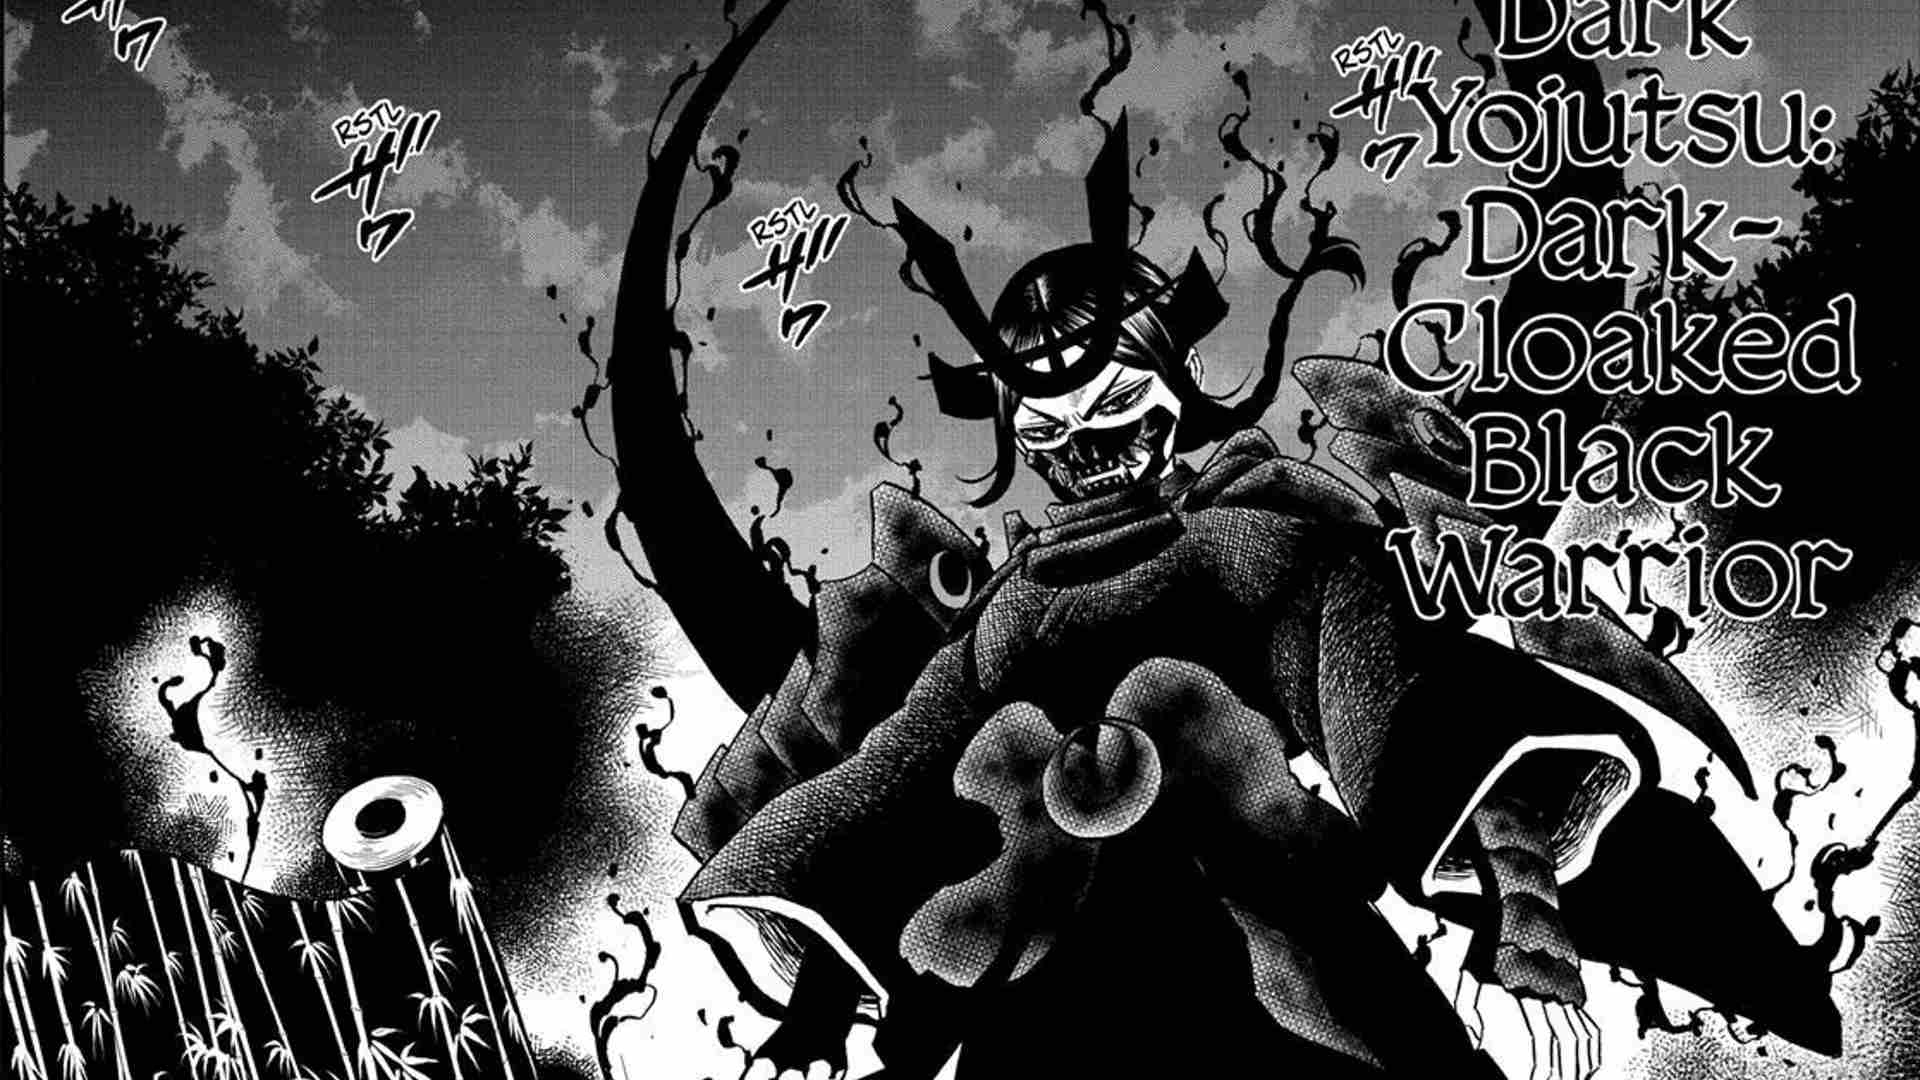 Black Clover Chapter 324 Release Date, Spoilers And Where To Read?